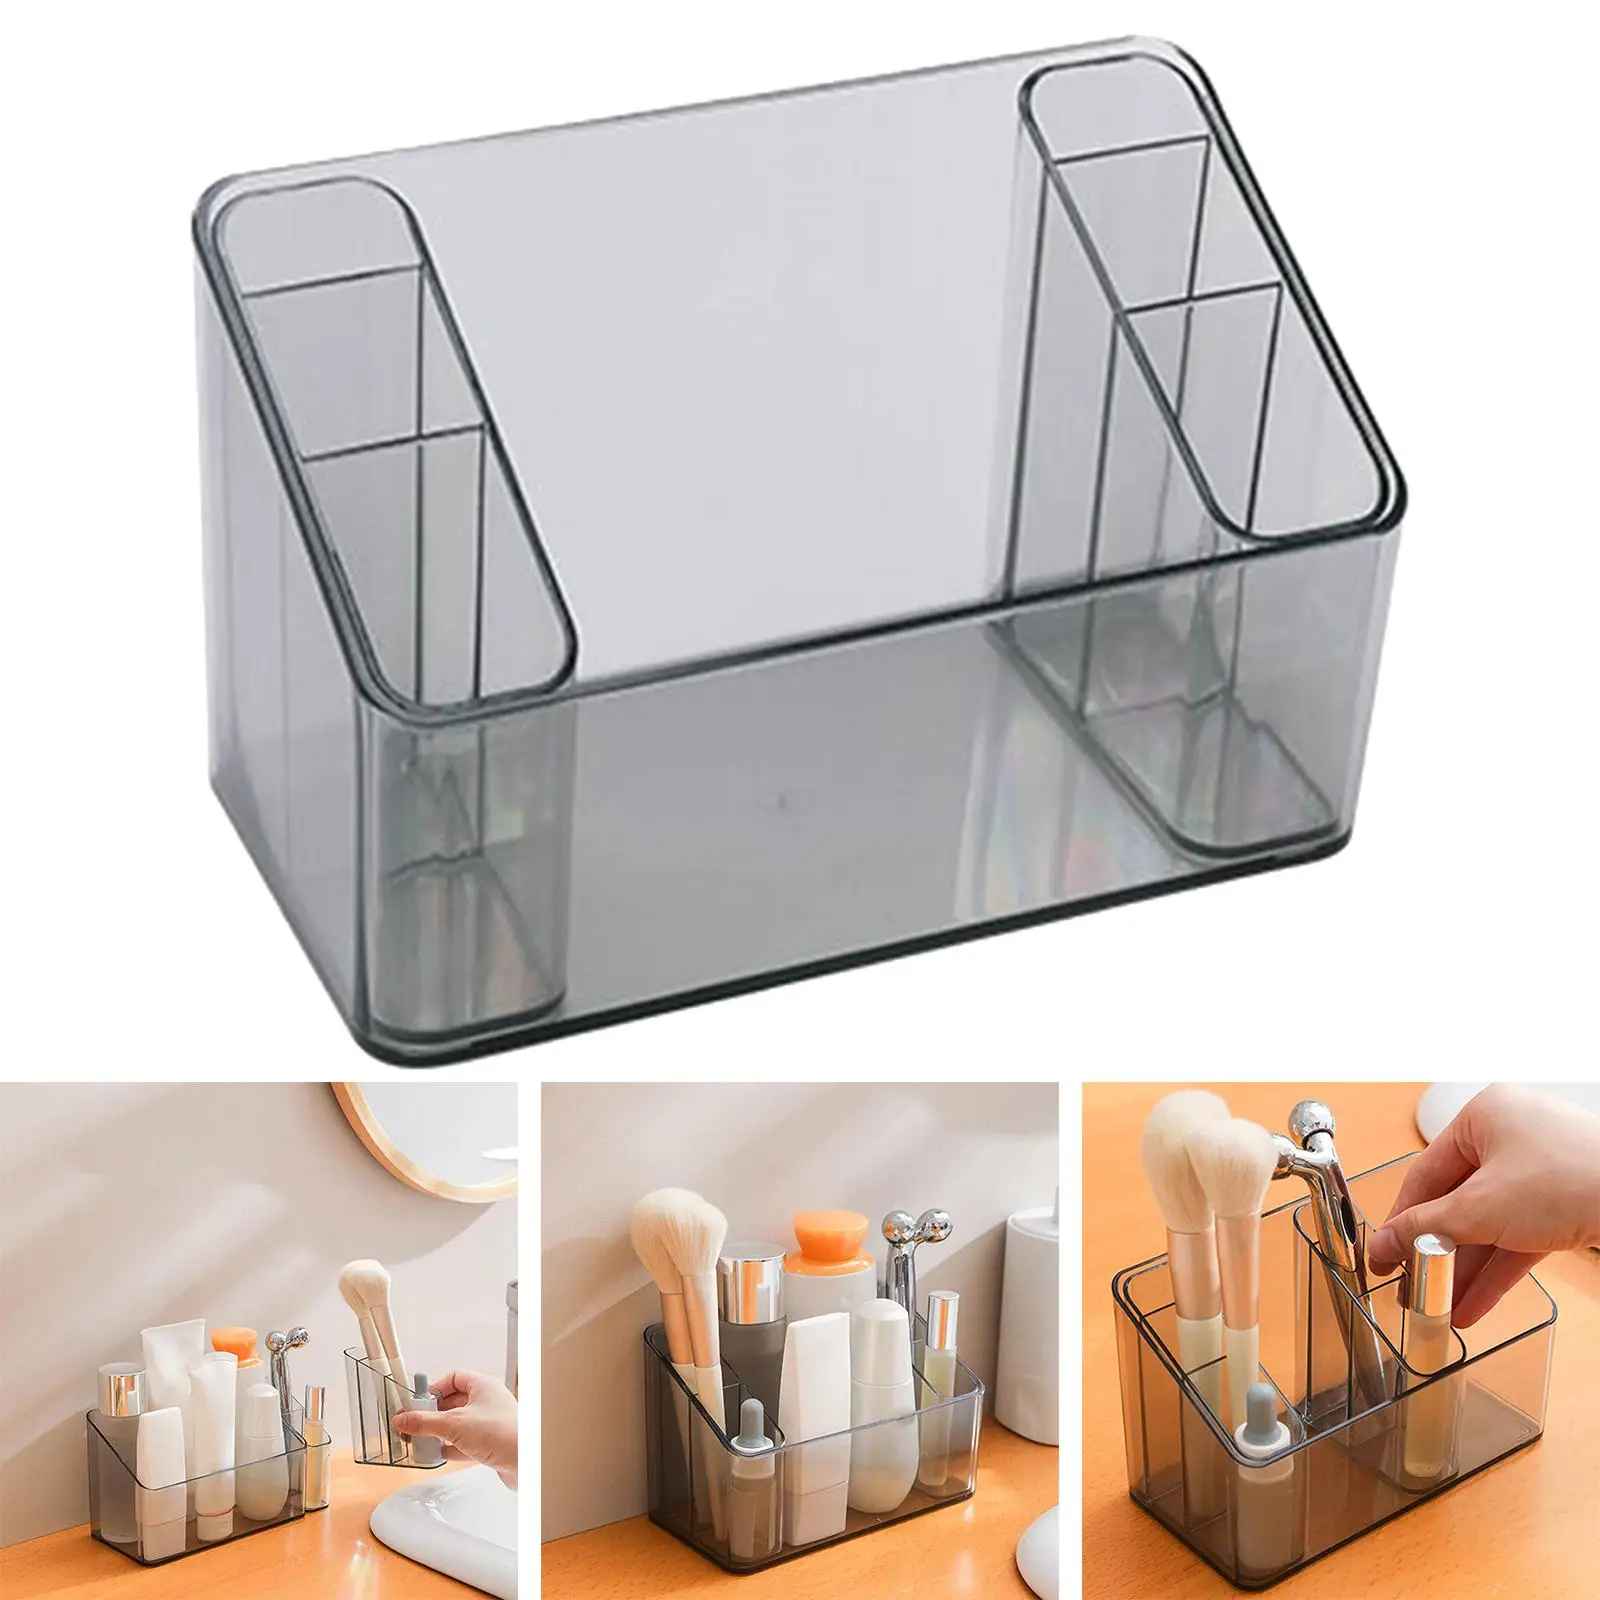 Multifunction Cosmetic Display Case Storage Box Skincare Holder Caddy Basket for Concealers Countertop Bathroom Counter Dresser